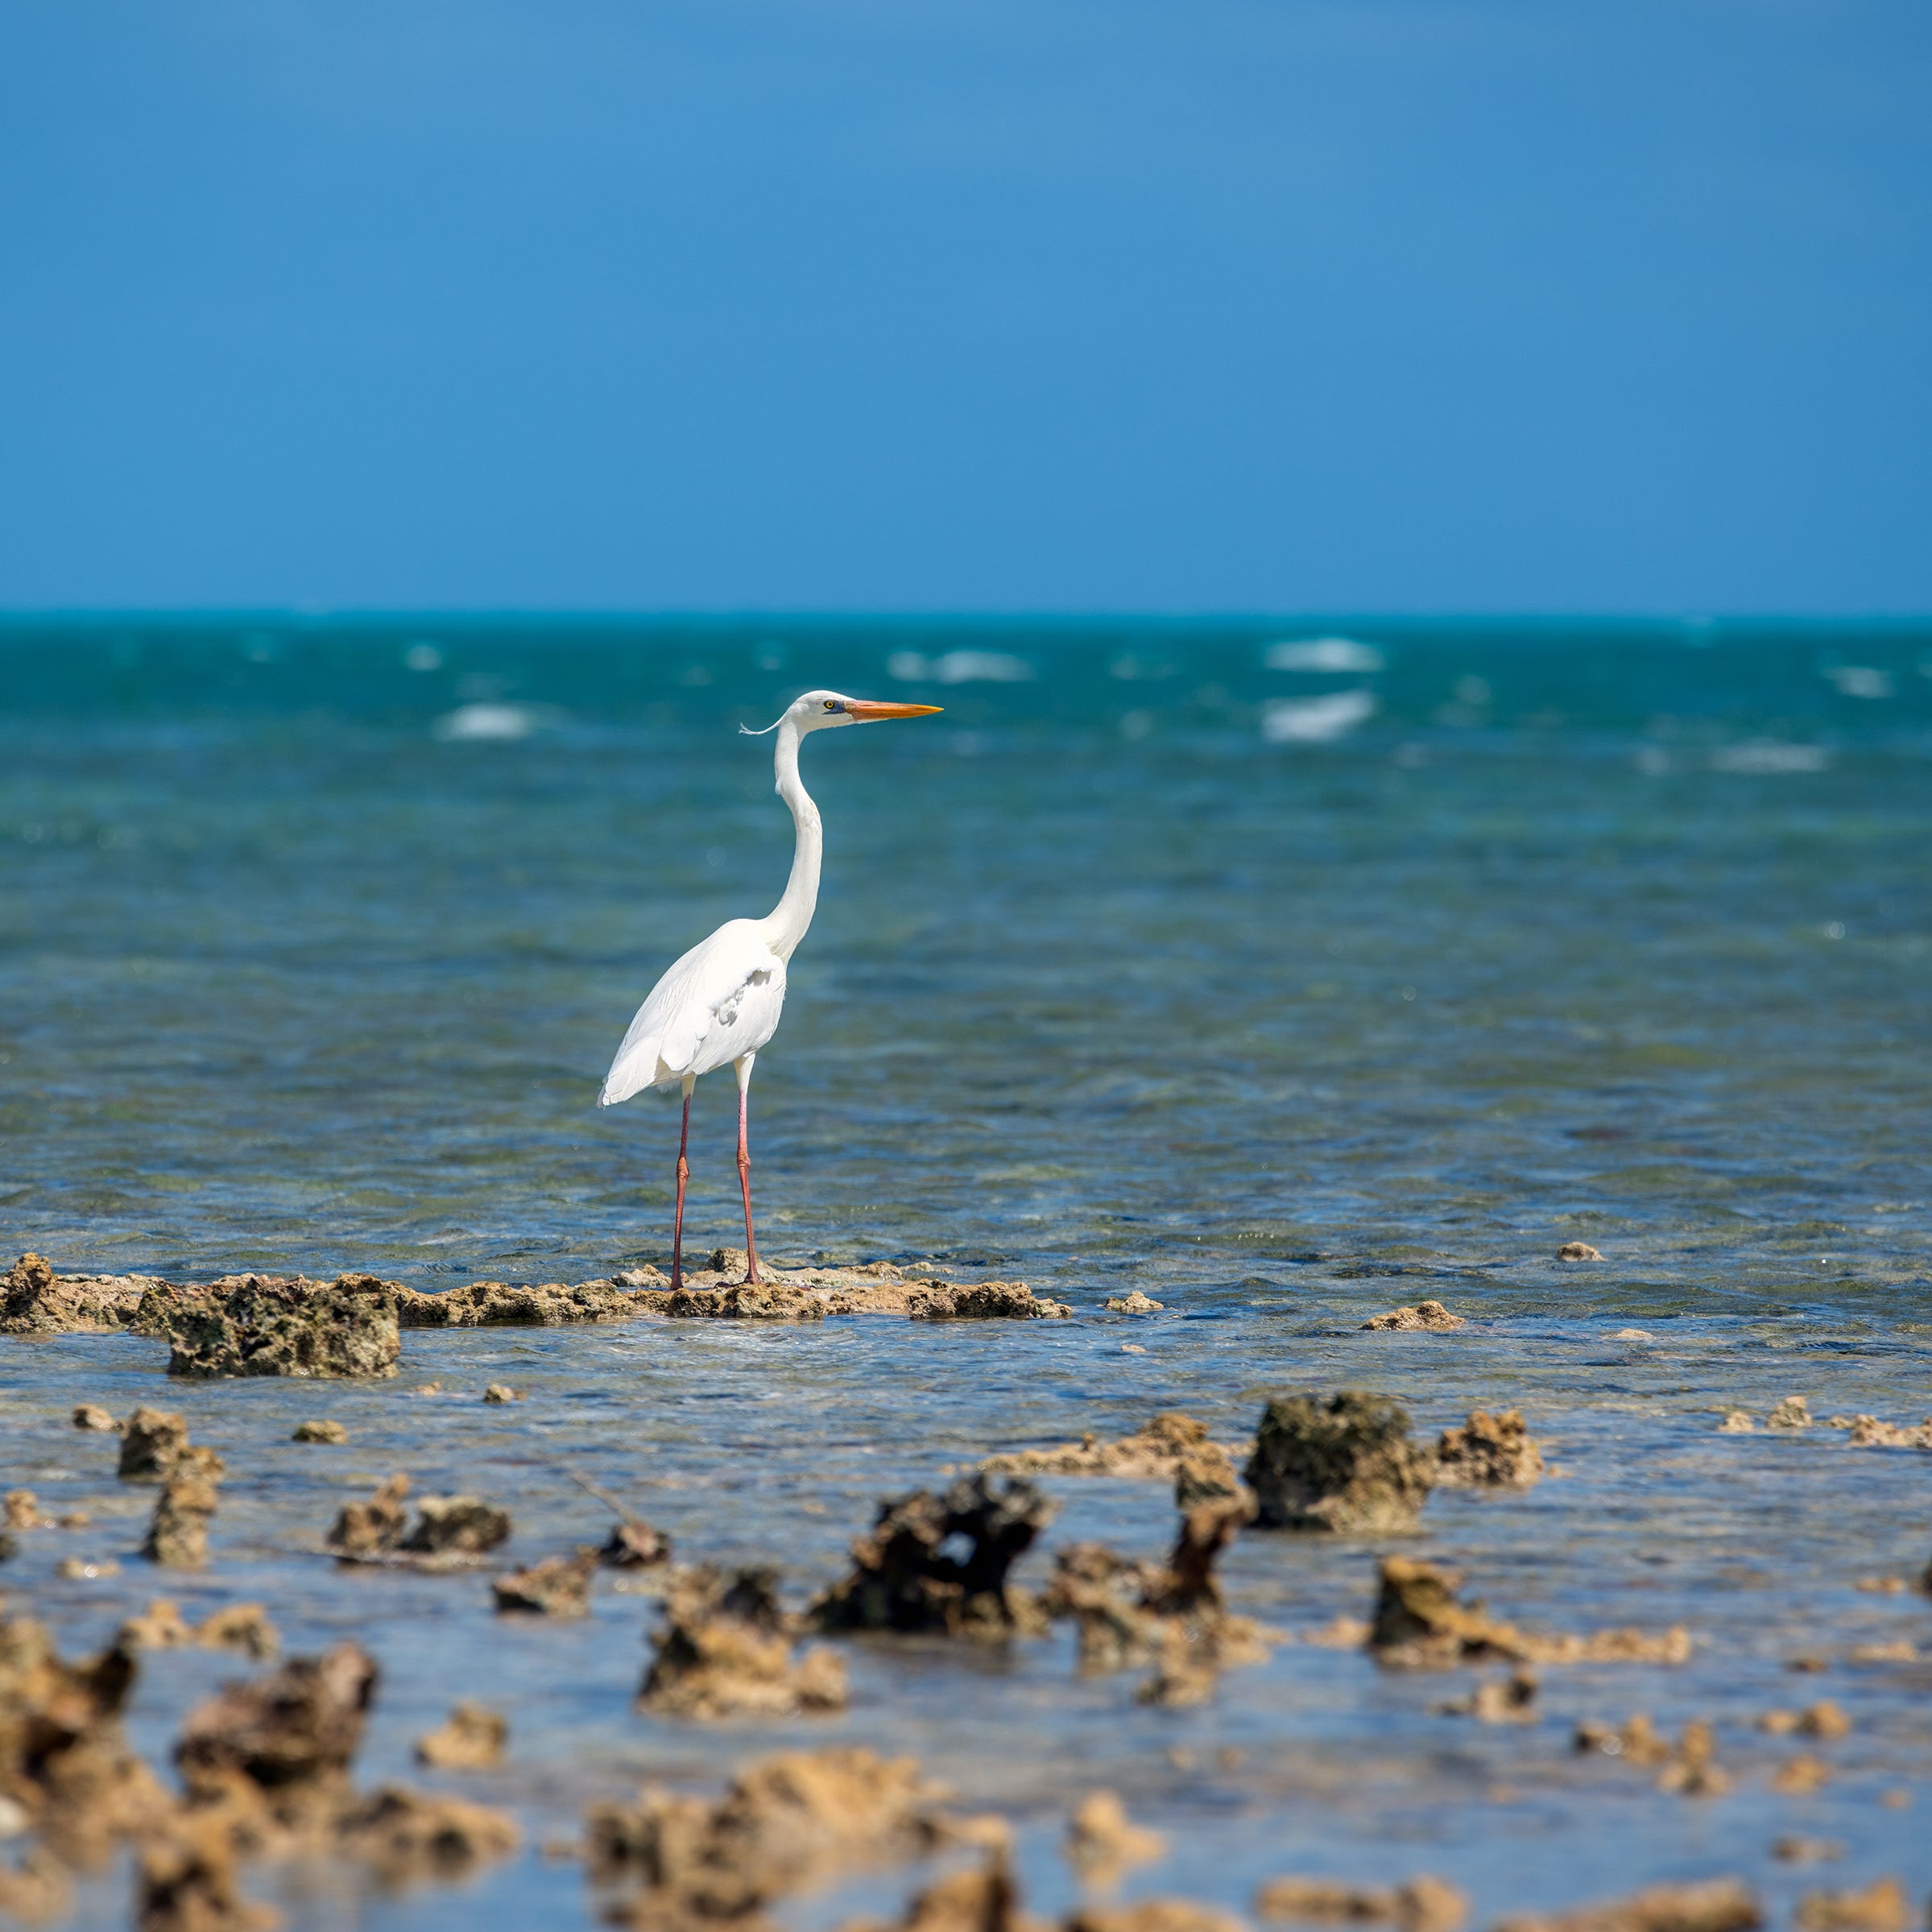 Birding is a popular activity at Biscayne National Park.